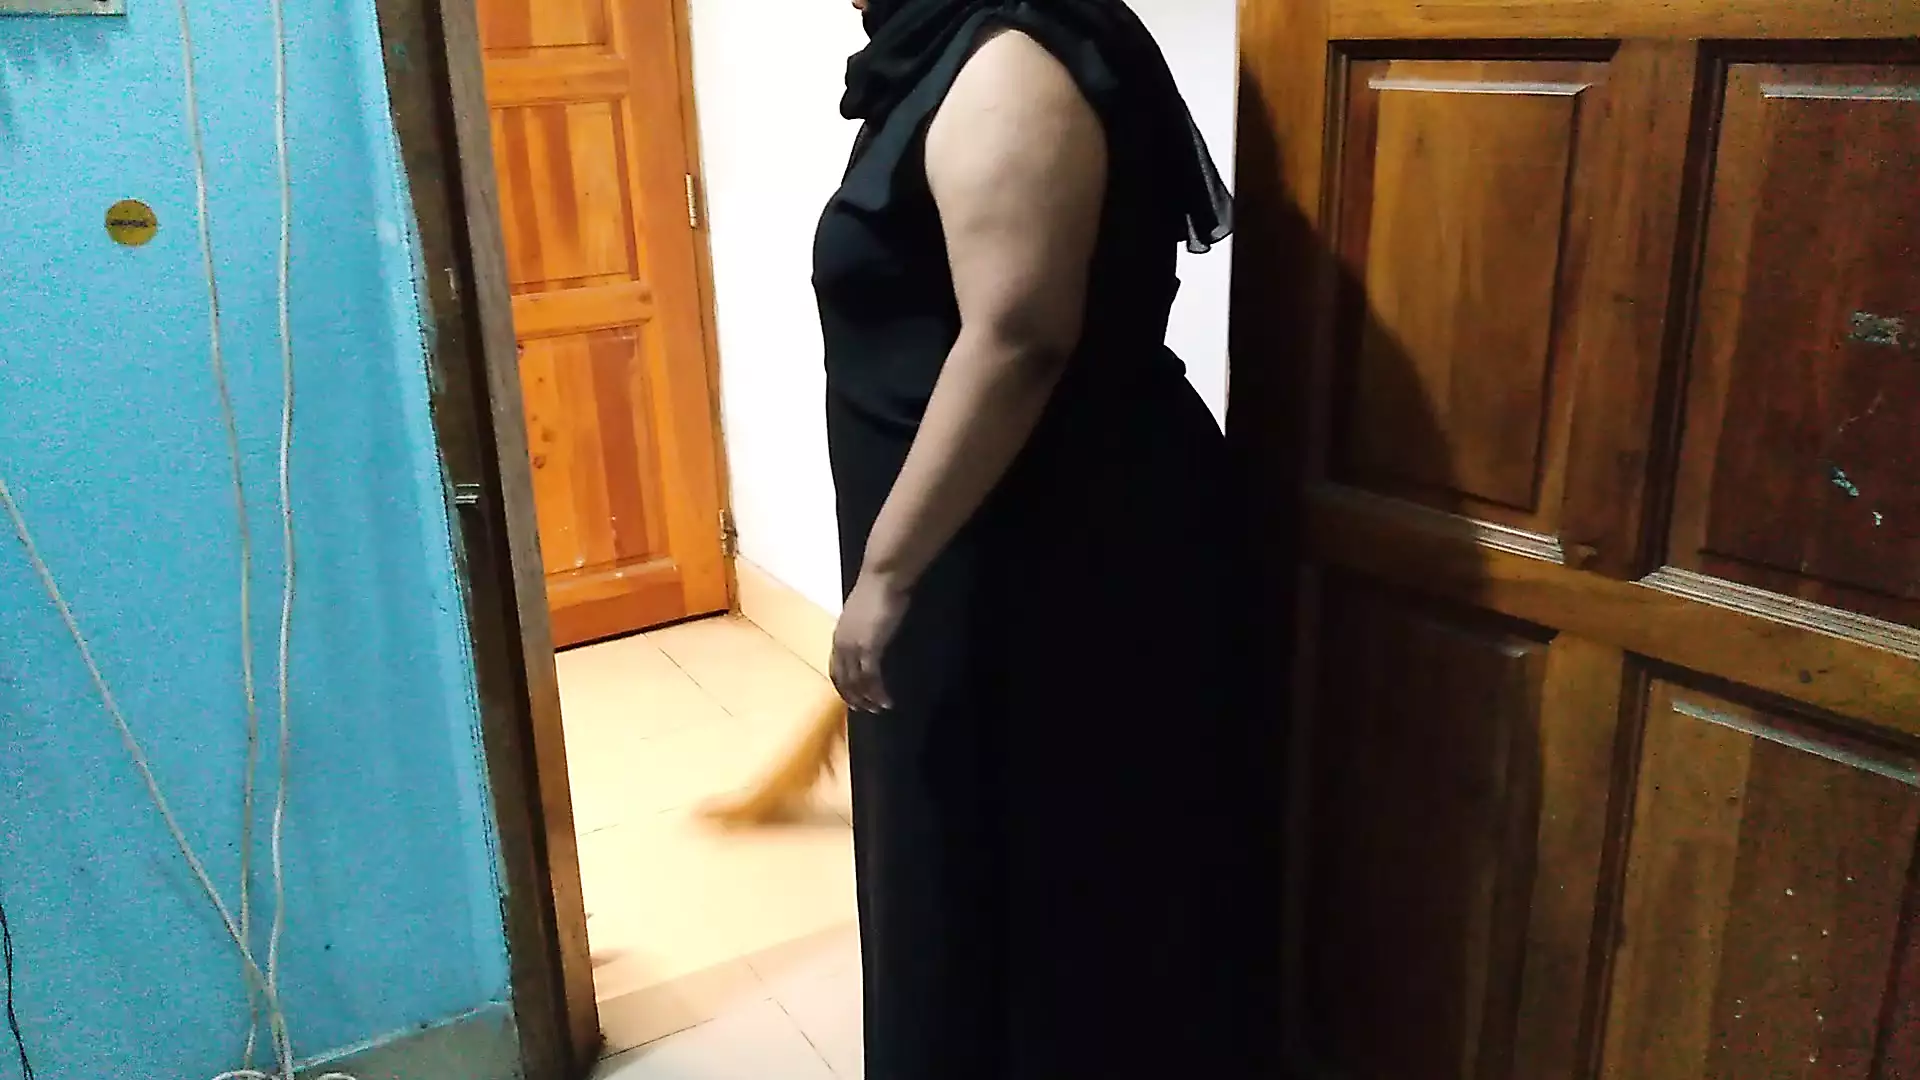 Saudi Hot Aunty Is Sweeping The House When Neighbor Boy Who Saw Her Big Tits And Ass Gets Seduced photo image